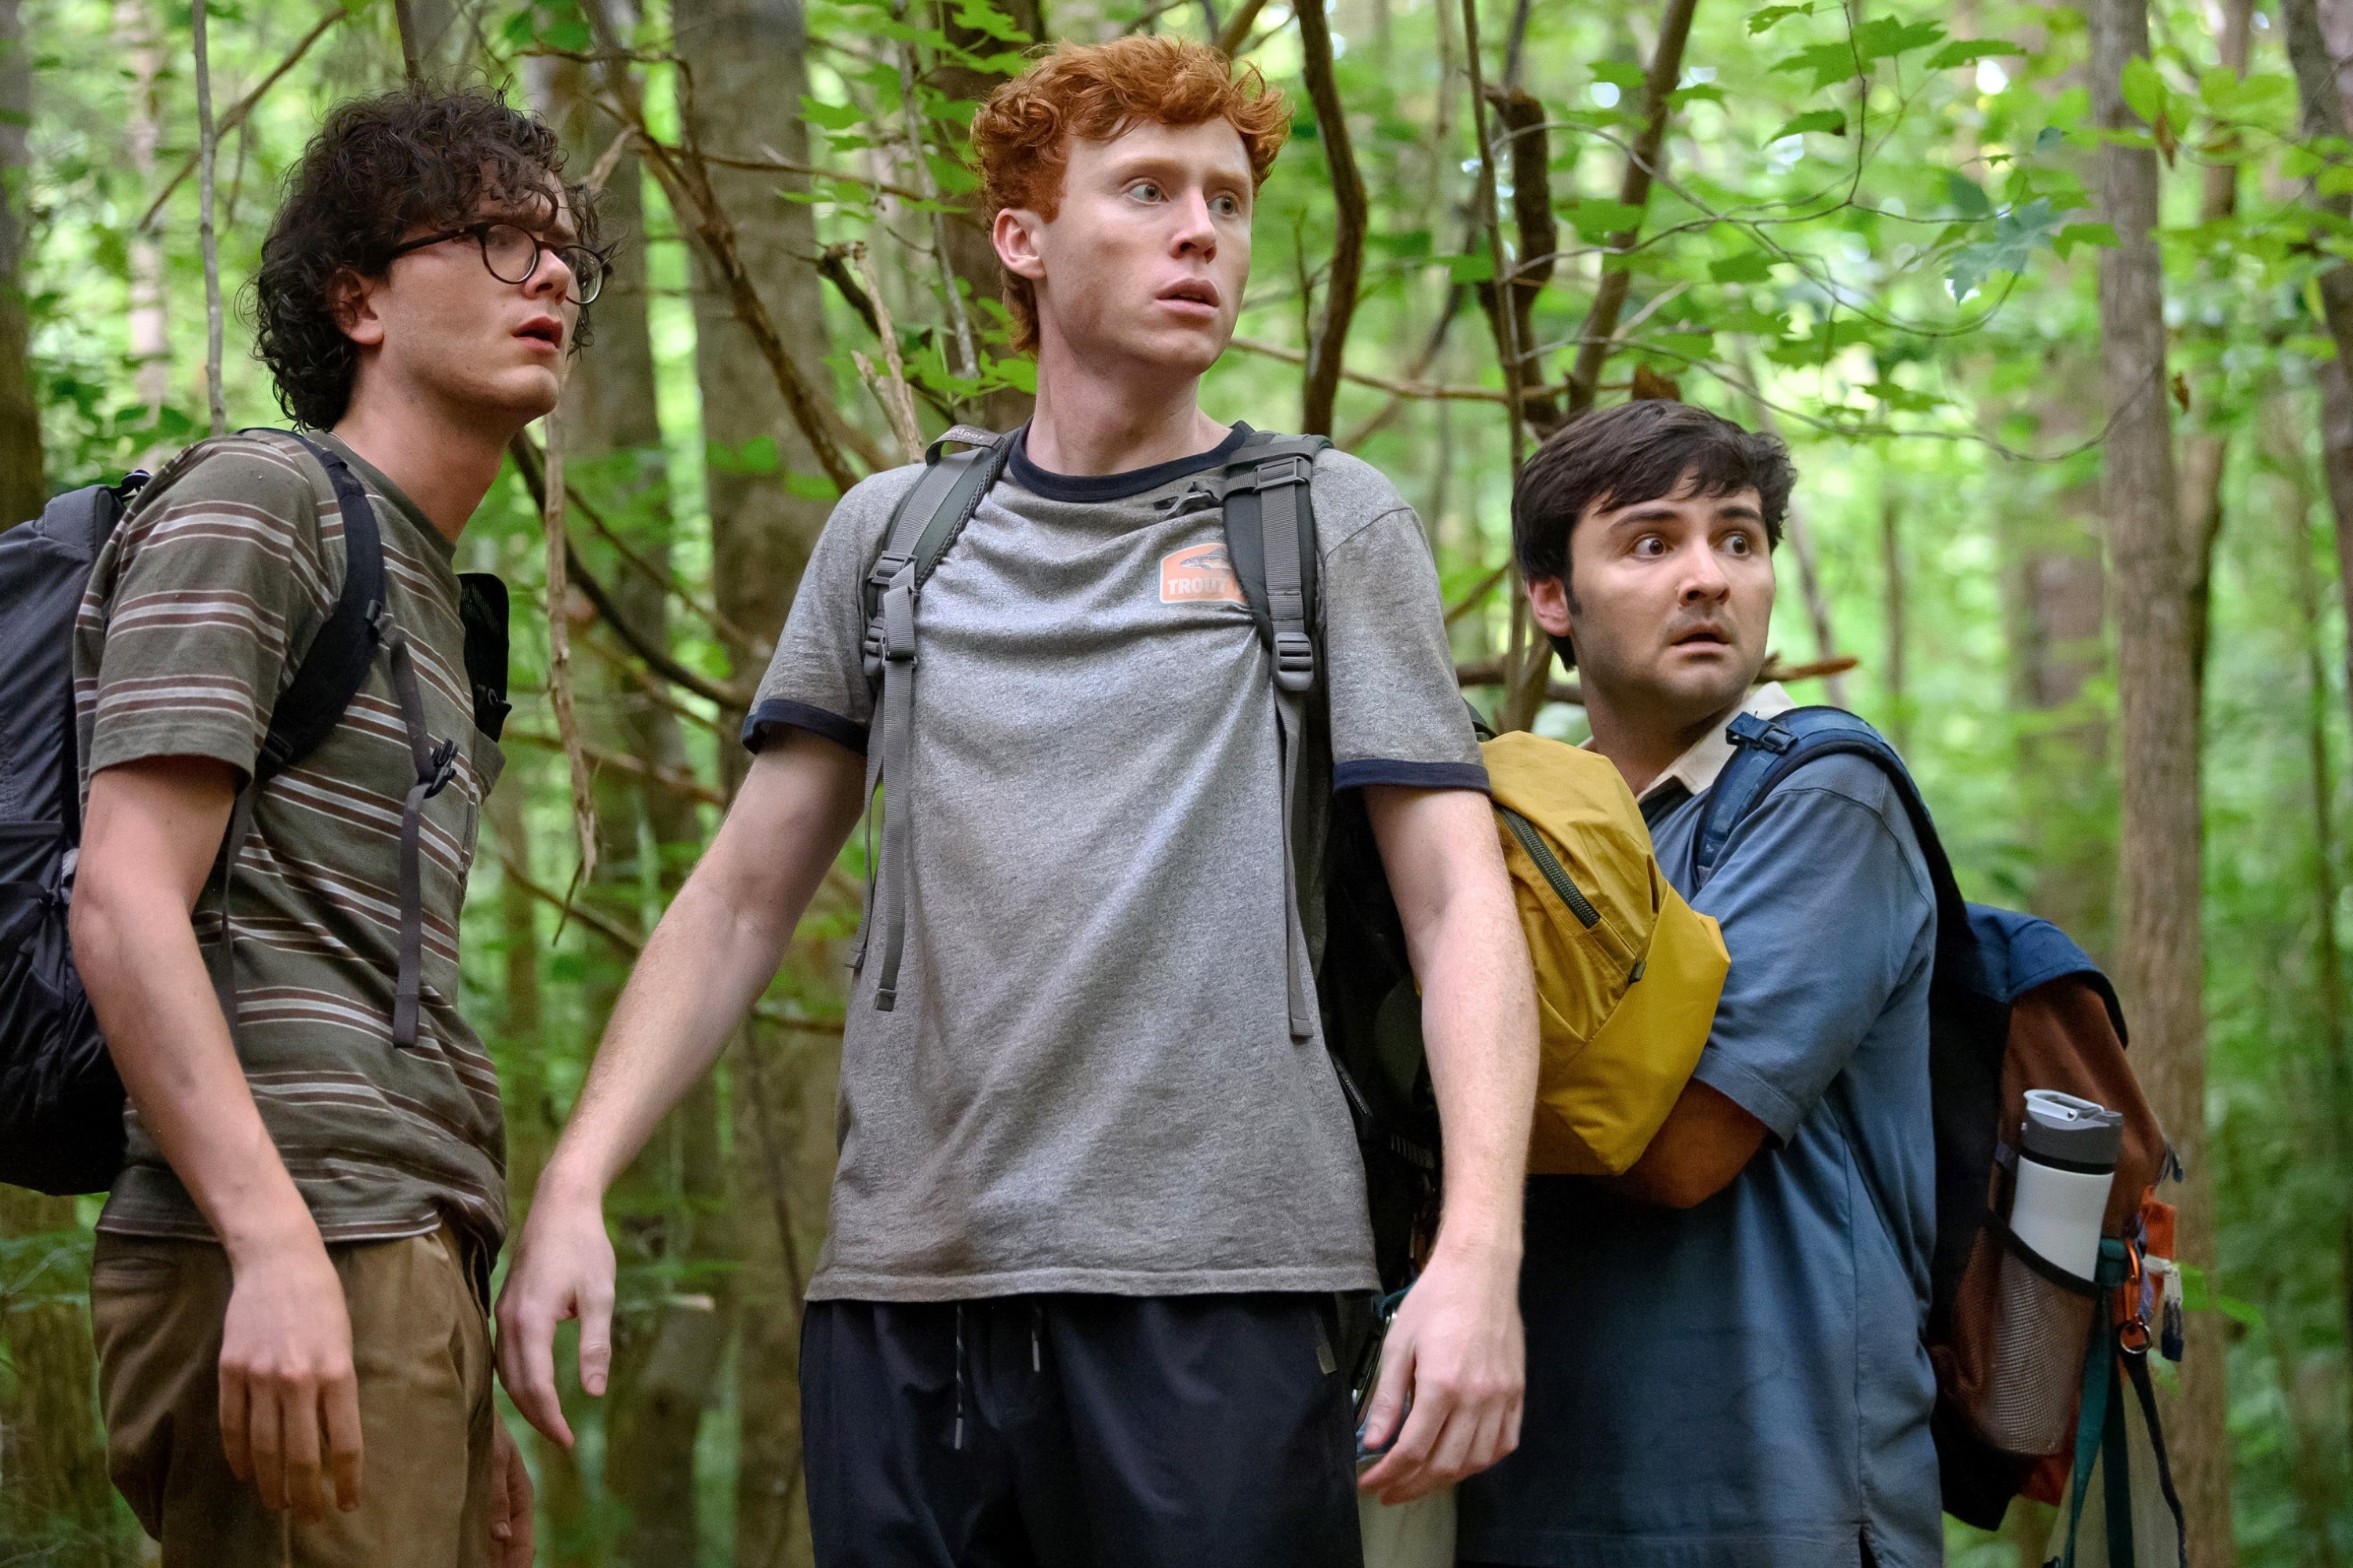 Martin, Ben, and John in the woods wearing backpacks